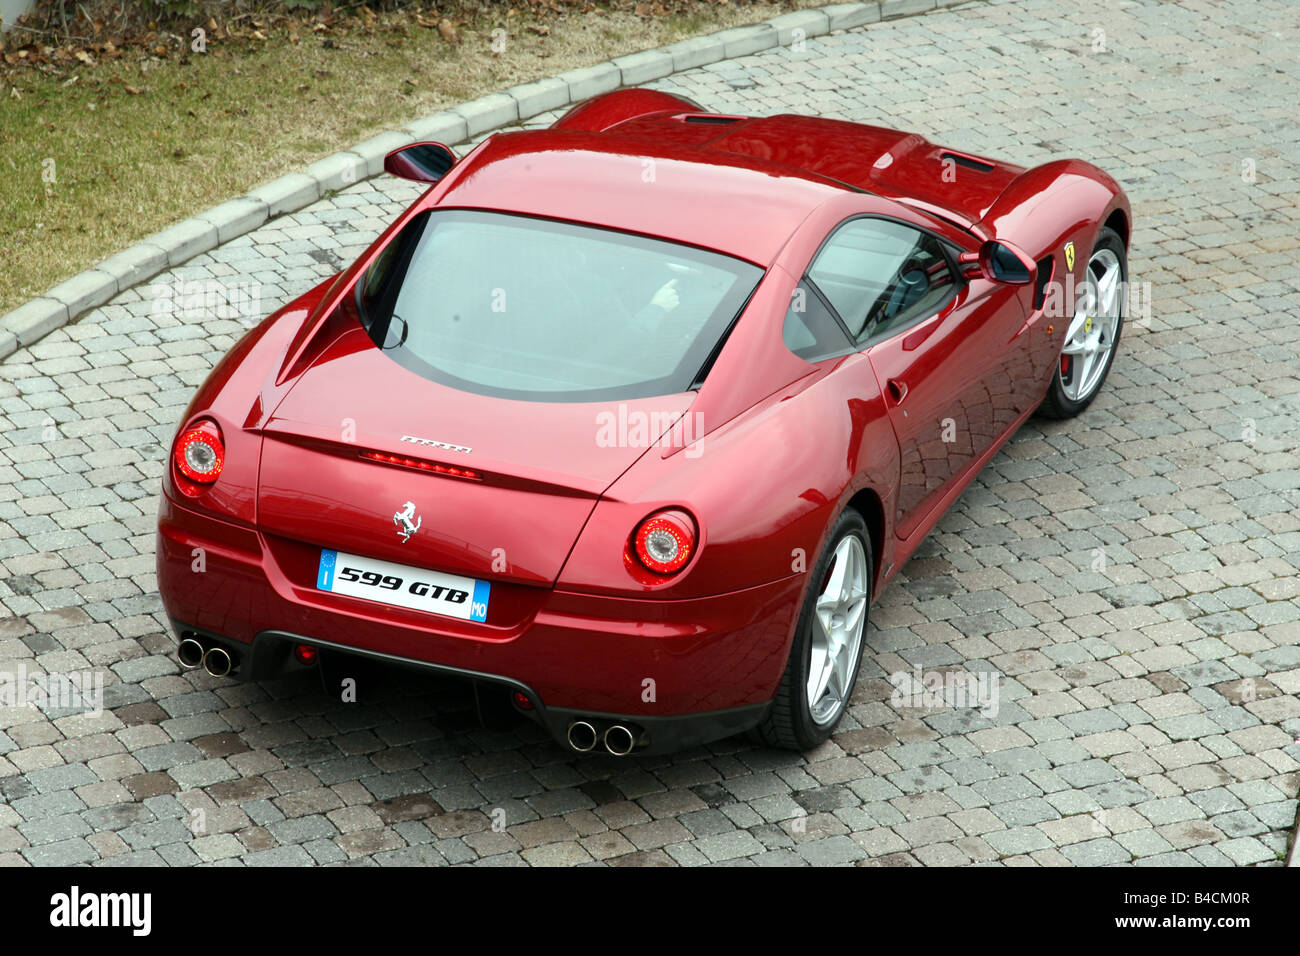 Ferrari 599 GTB Fiorano, red, model year 2006-, standing, upholding, diagonal from the back, Rear view Stock Photo